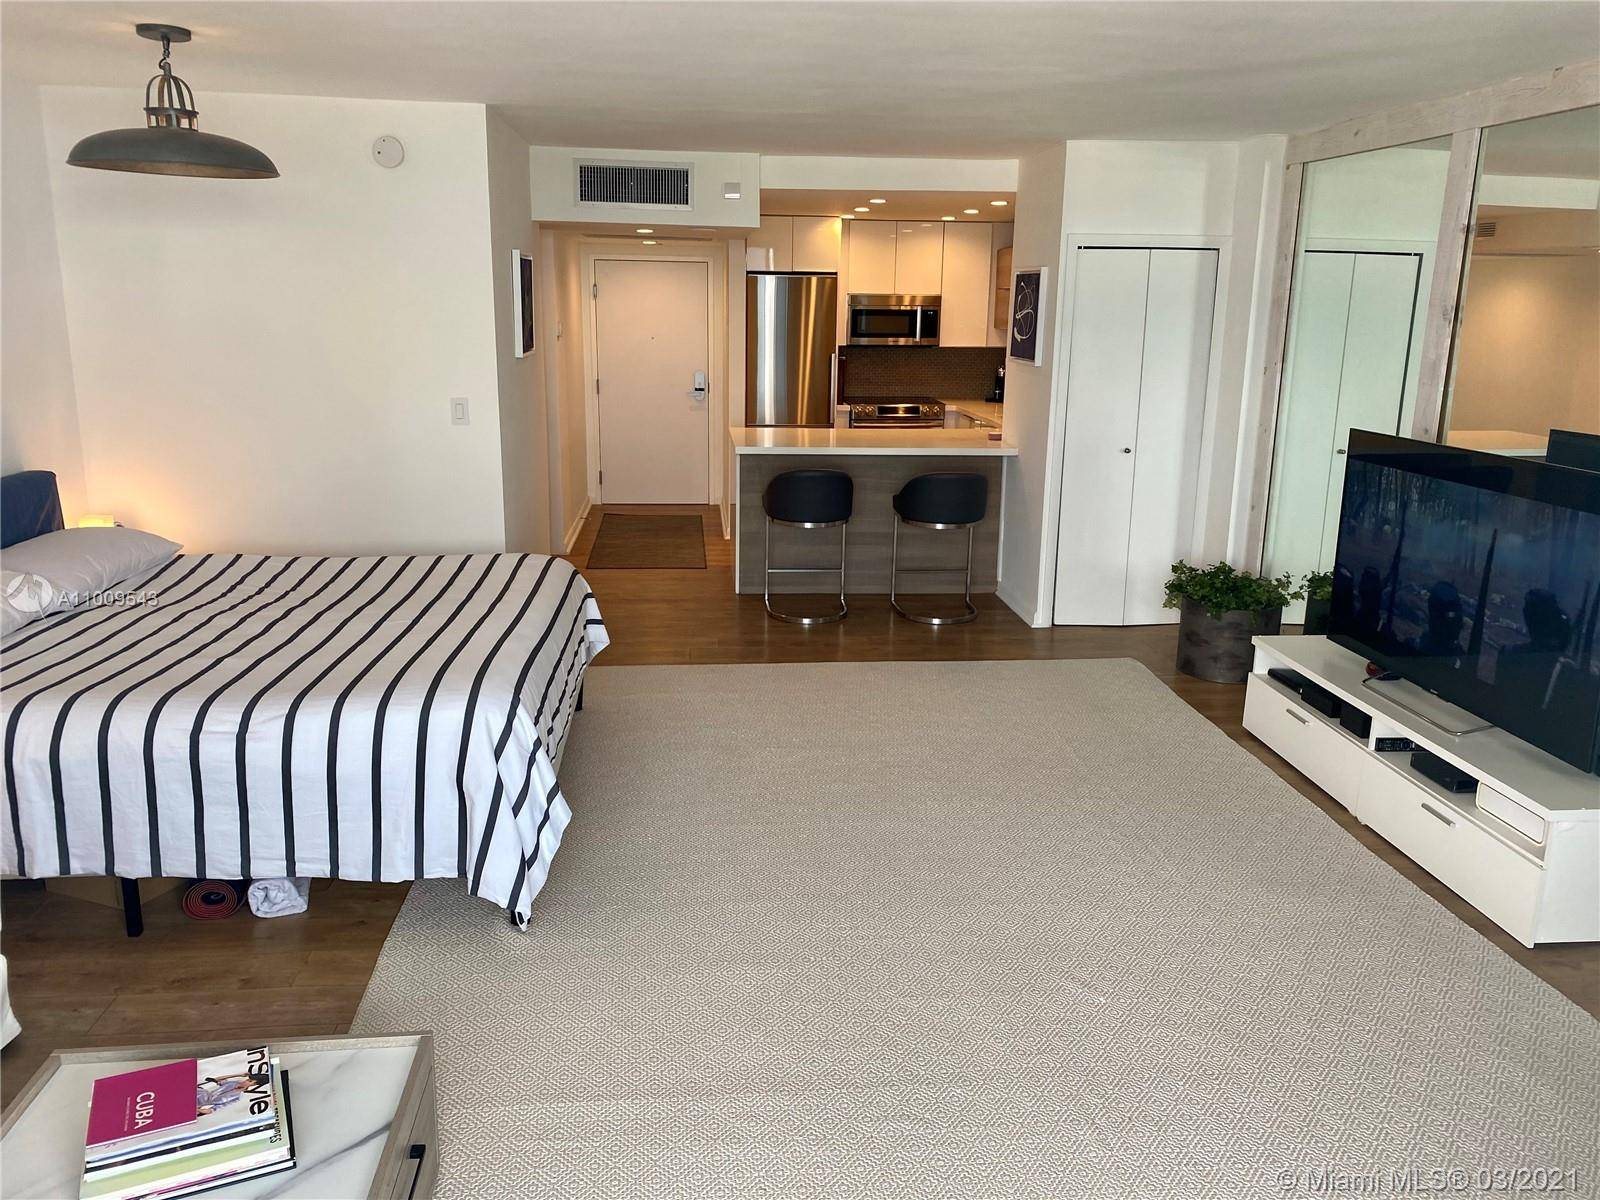 Completely remodeled and updated studio located at the Roney palace in the heart of South Beach.